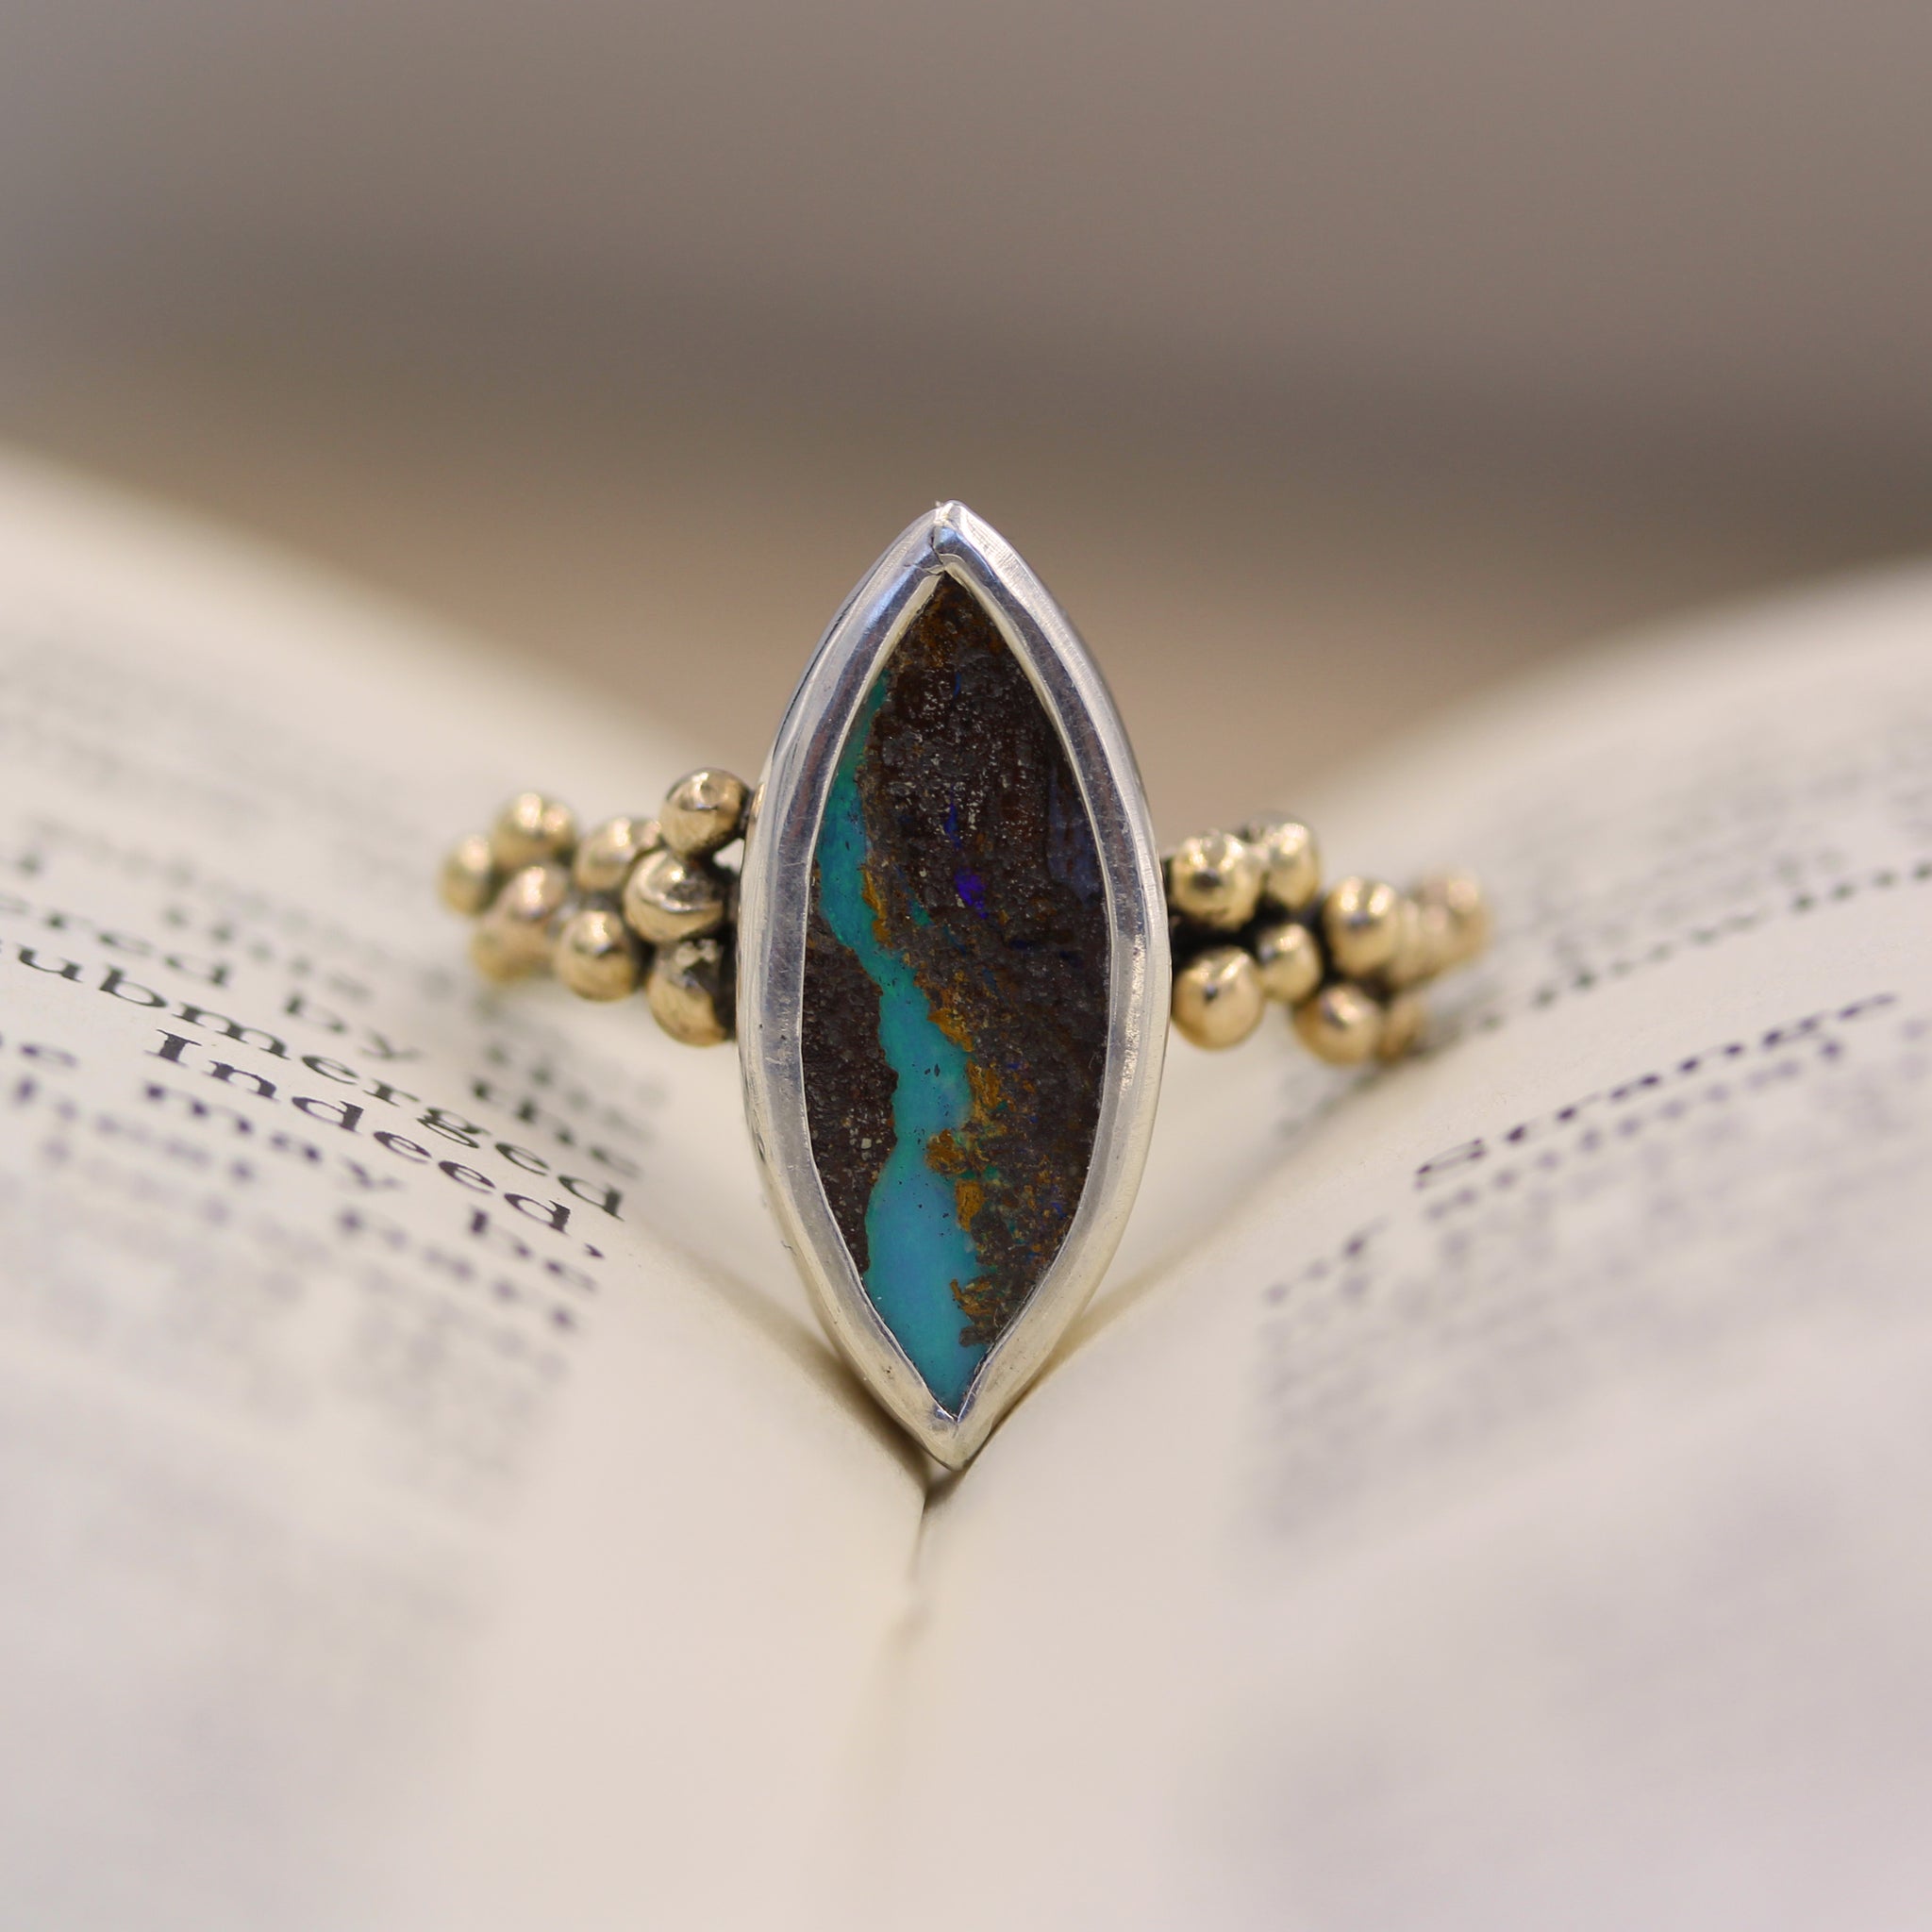 Australian Boulder Opal, silver and gold ring 